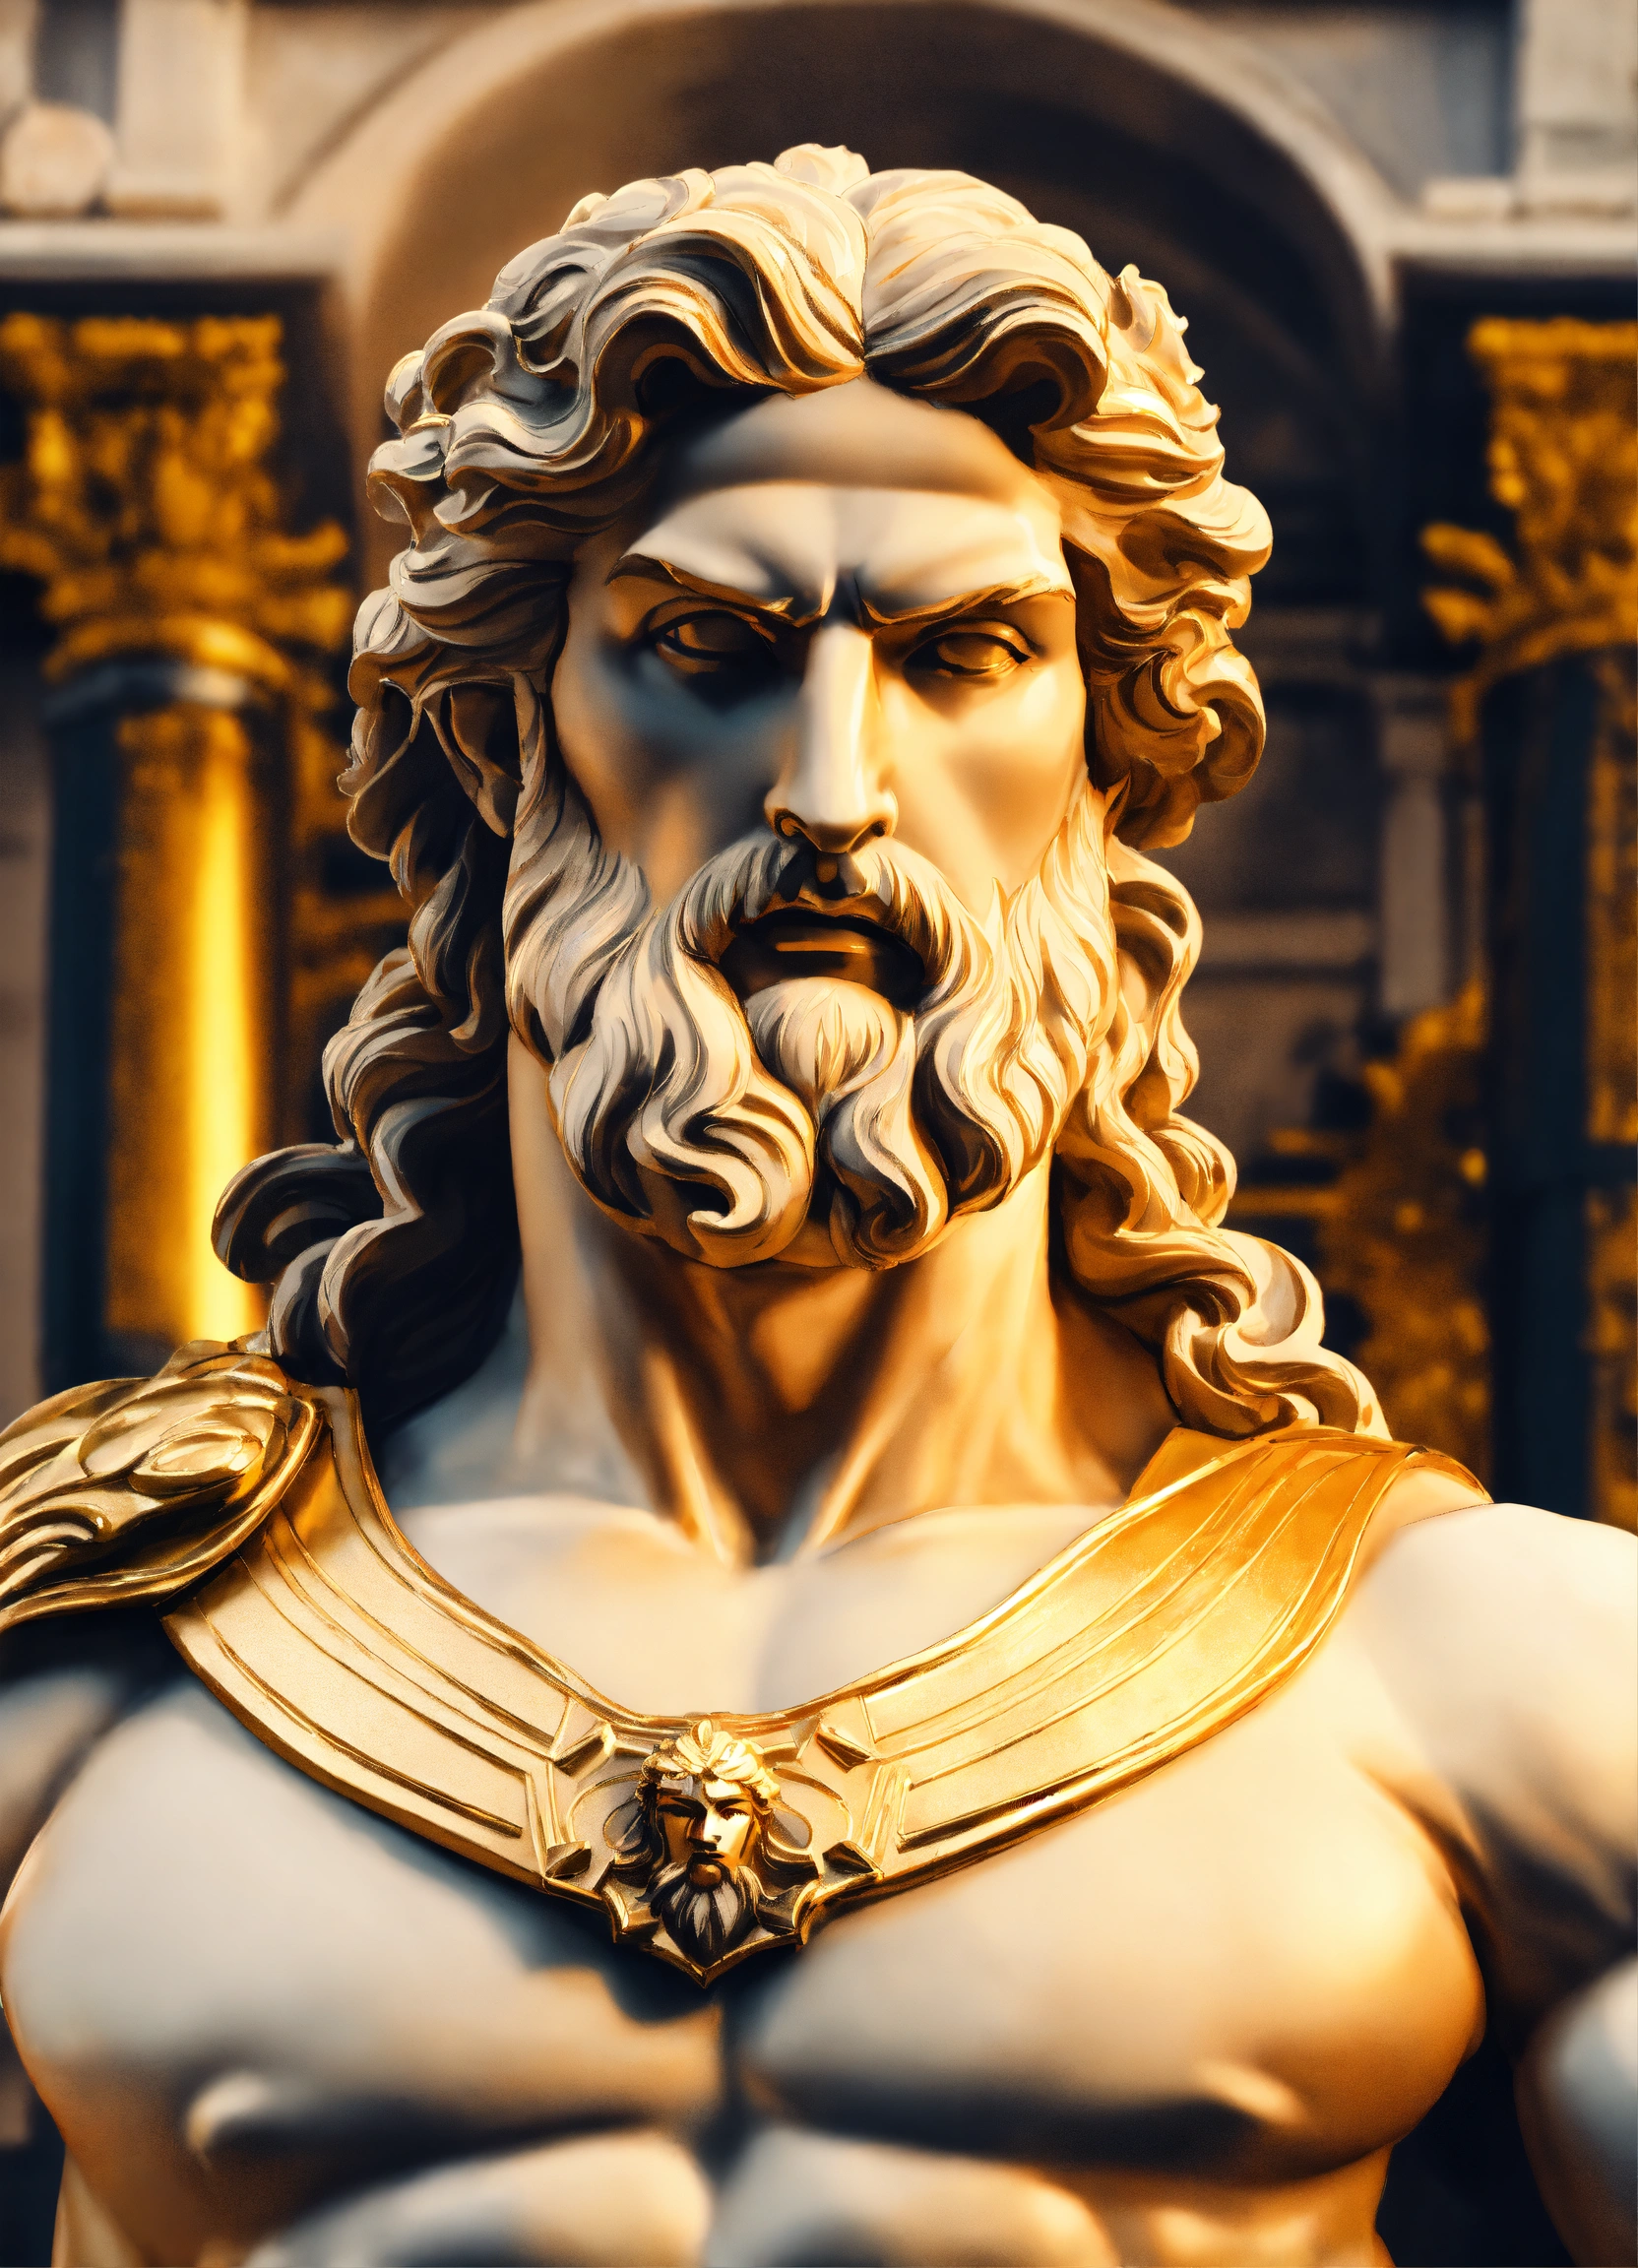 Lexica - Manga-style image of a statue bust of a muscular Greek god ...